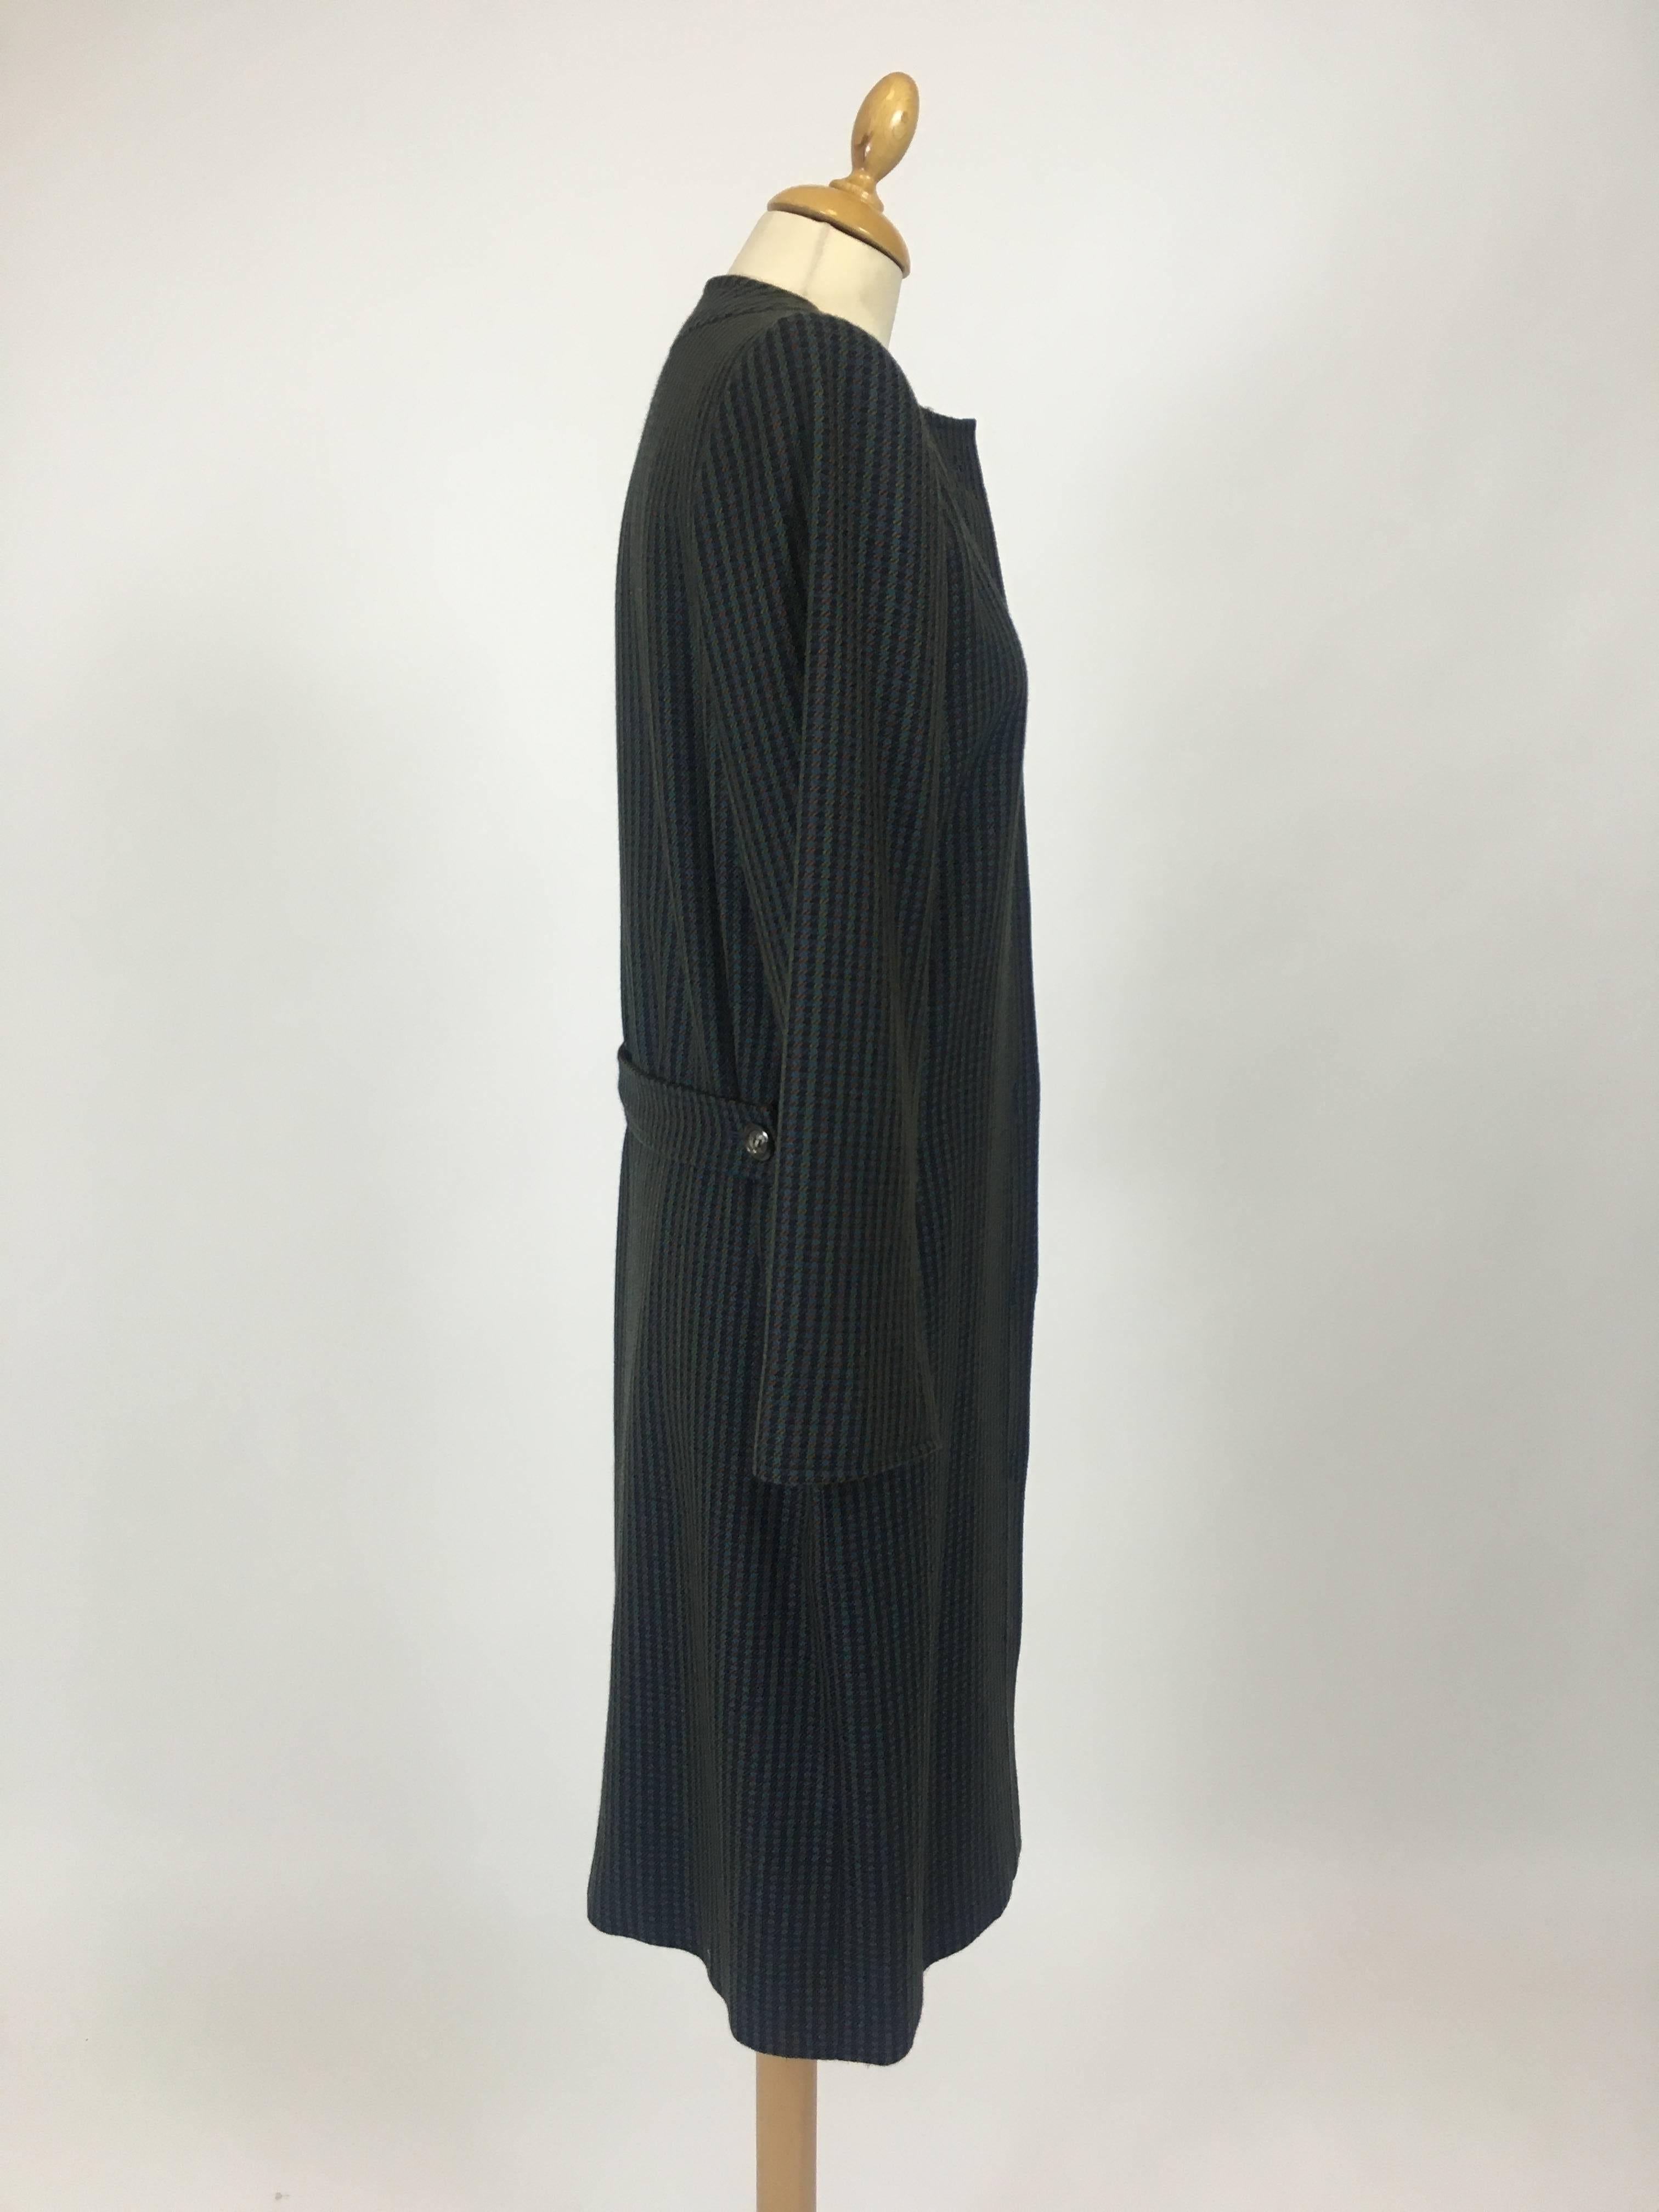 This lovely 1980s Saint Laurent overcoat is in a woolen checkered fabric. It has a martingale, two side pockets, long sleeves with 2 buttons and is fully lined. It has slightly padded shoulders with the typical line of YLS. 

Very Good vintage